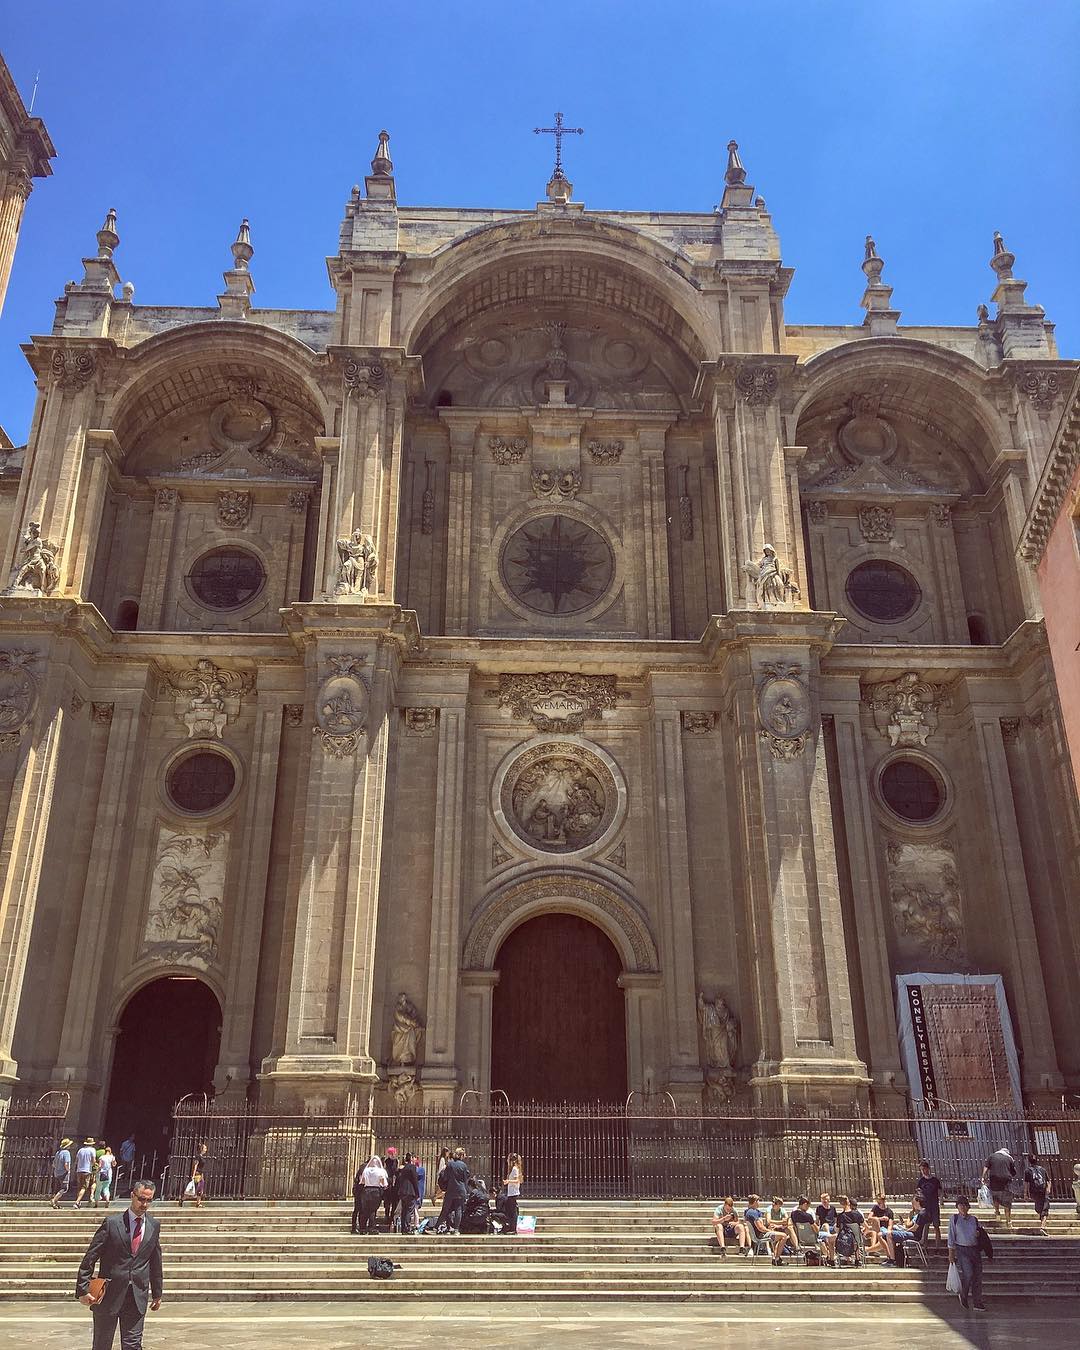 The Granada Cathedral ✨
I use to walk past this beaut all the time while studying abroad. Being from America it amazes me that people get to see historical buildings like this everyday! .
.
#happyfriday #granada #cathedral #europe #spain #spaintravel #travel #inspiration #photography #architecture #architecturephotography #studyabroad #travelinspiration #travelblogger #blogger #newblog #ginger #lost #wanderlust #explore #history #readyfortheweekend #adventure